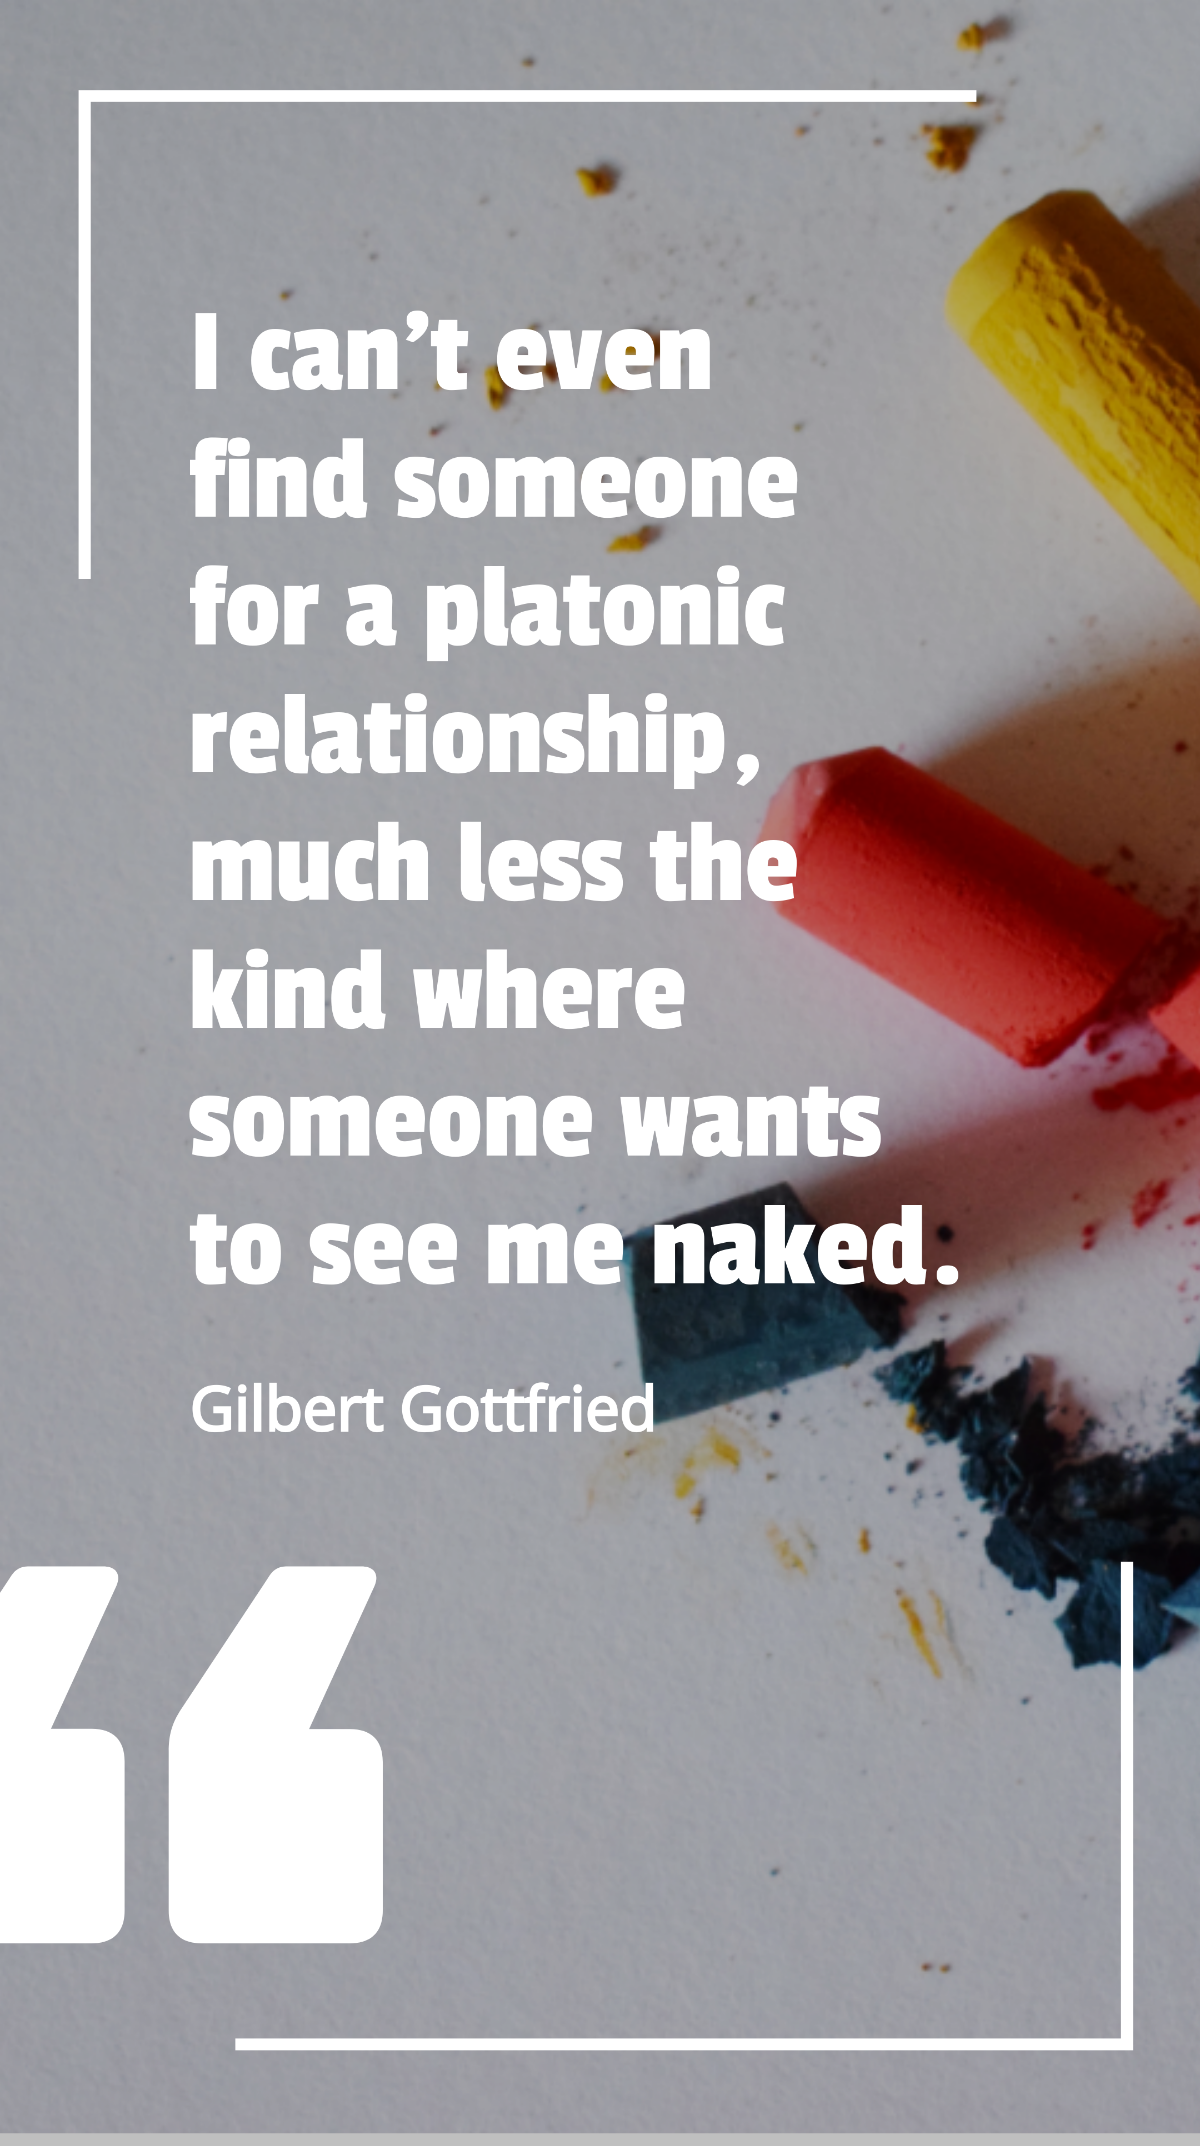 Gilbert Gottfried - I can't even find someone for a platonic relationship, much less the kind where someone wants to see me naked. Template